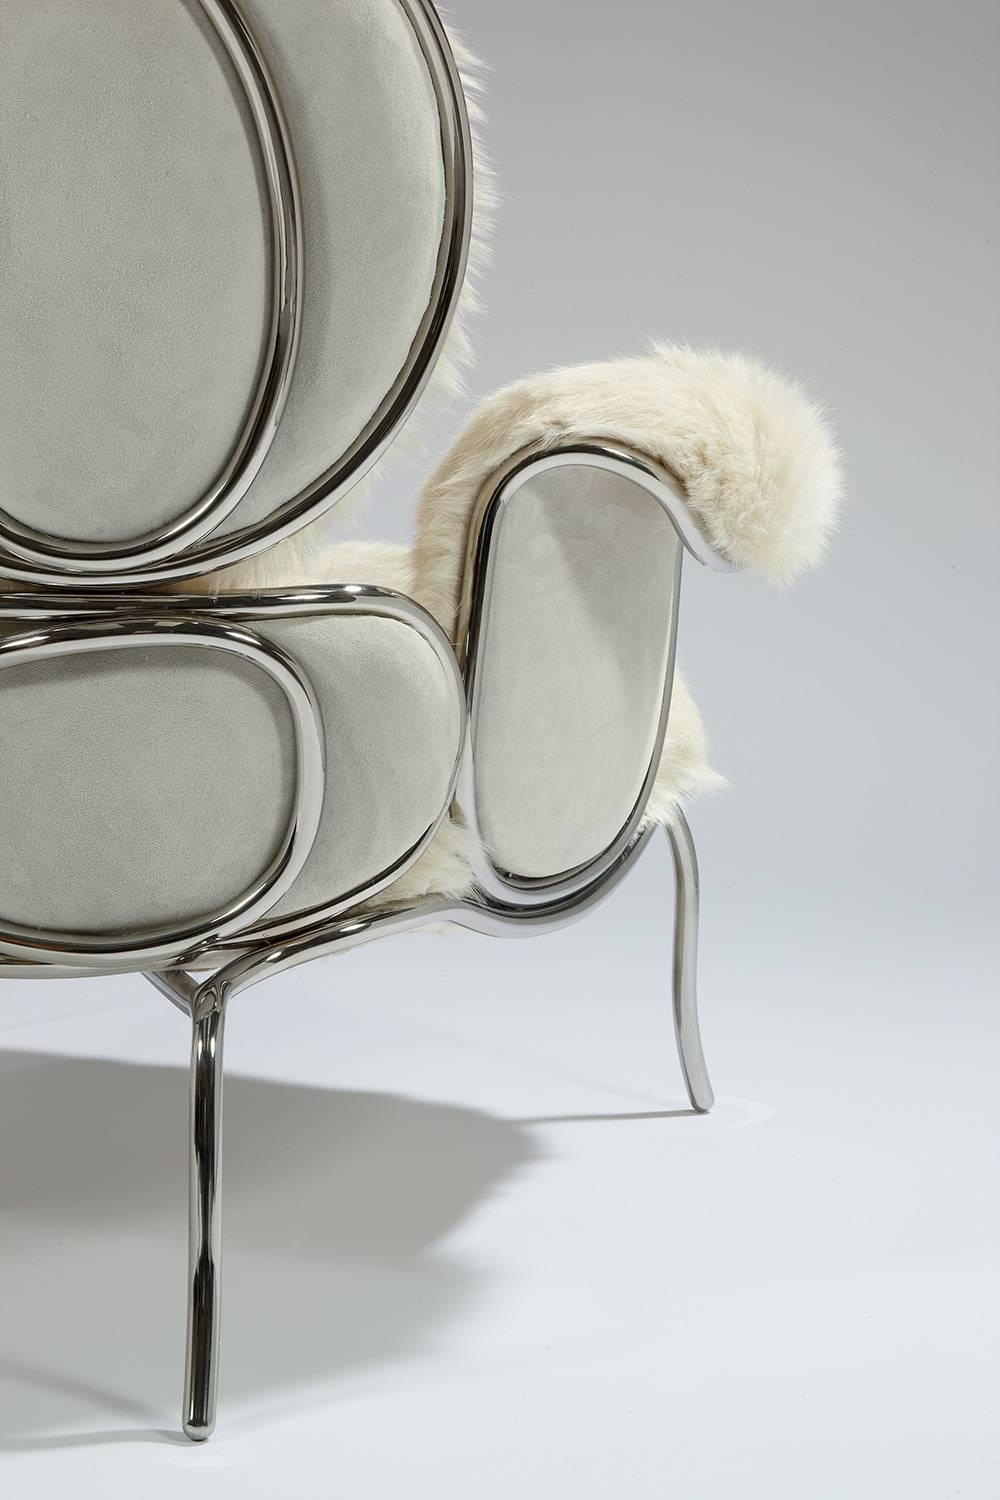 Mattia Bonetti
Armchair and ottoman 'Big Jim' 
2008.
Nickel-plated steel frame, fur/couture fabric, suede.
Chair: H 96 x L 96 x D 86 cm / H 37.8 x L 37.8 x D 33.9 in. 
Ottoman: H 27 x L 57 x D 53 cm / H 10.6 x L 22.4 x D 20.8 in.
Editions